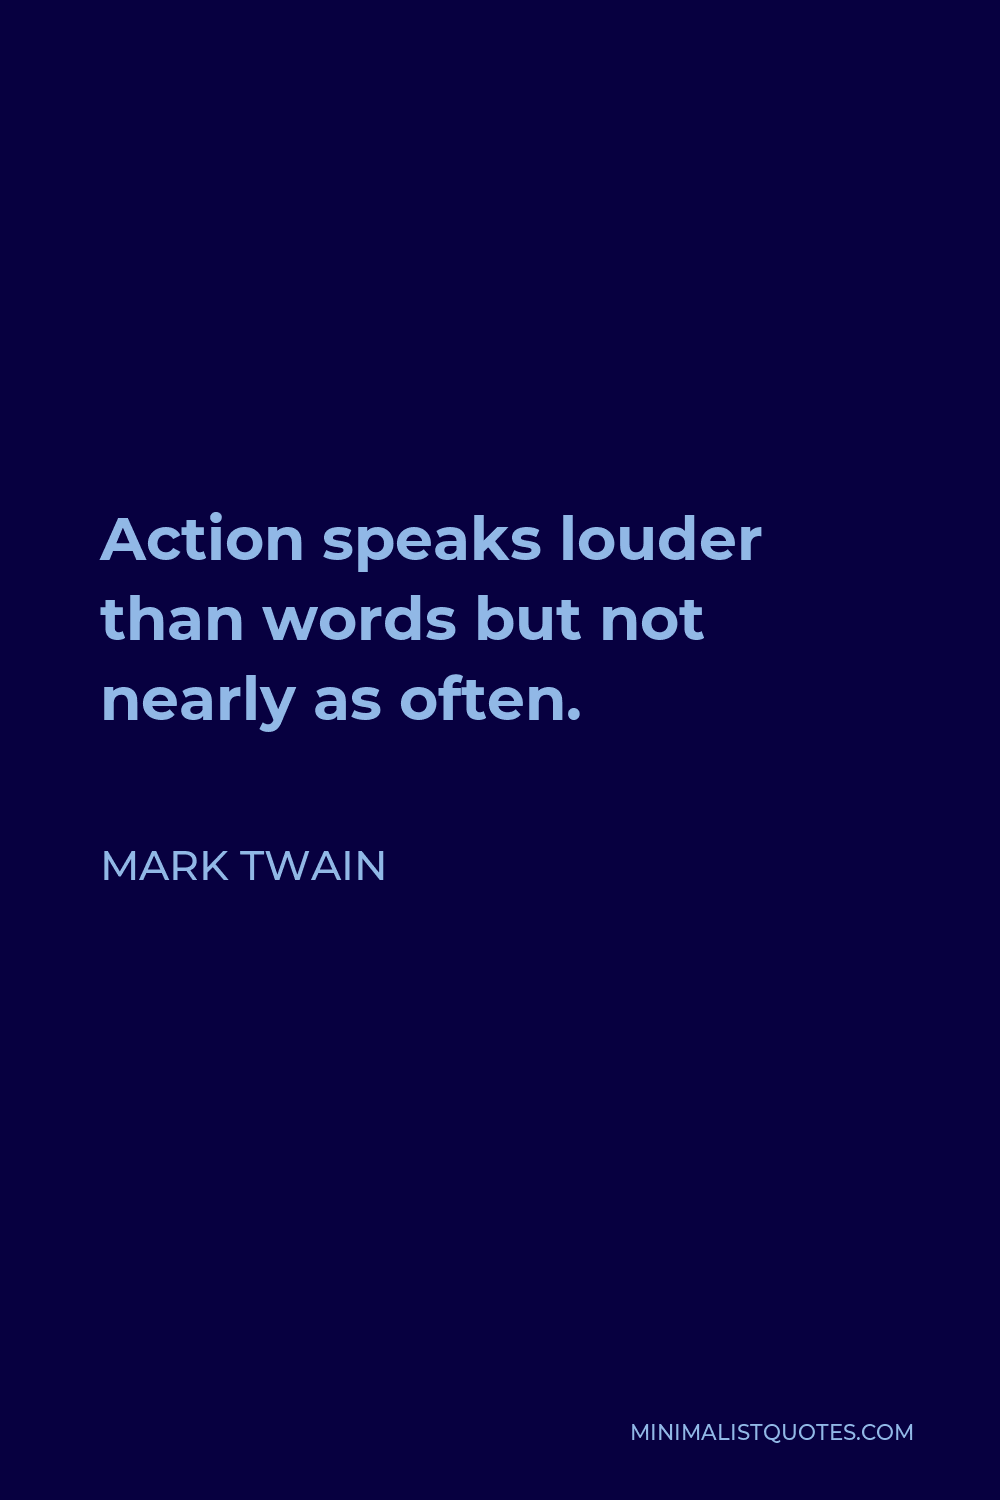 Mark Twain Quote - Action speaks louder than words but not nearly as often.